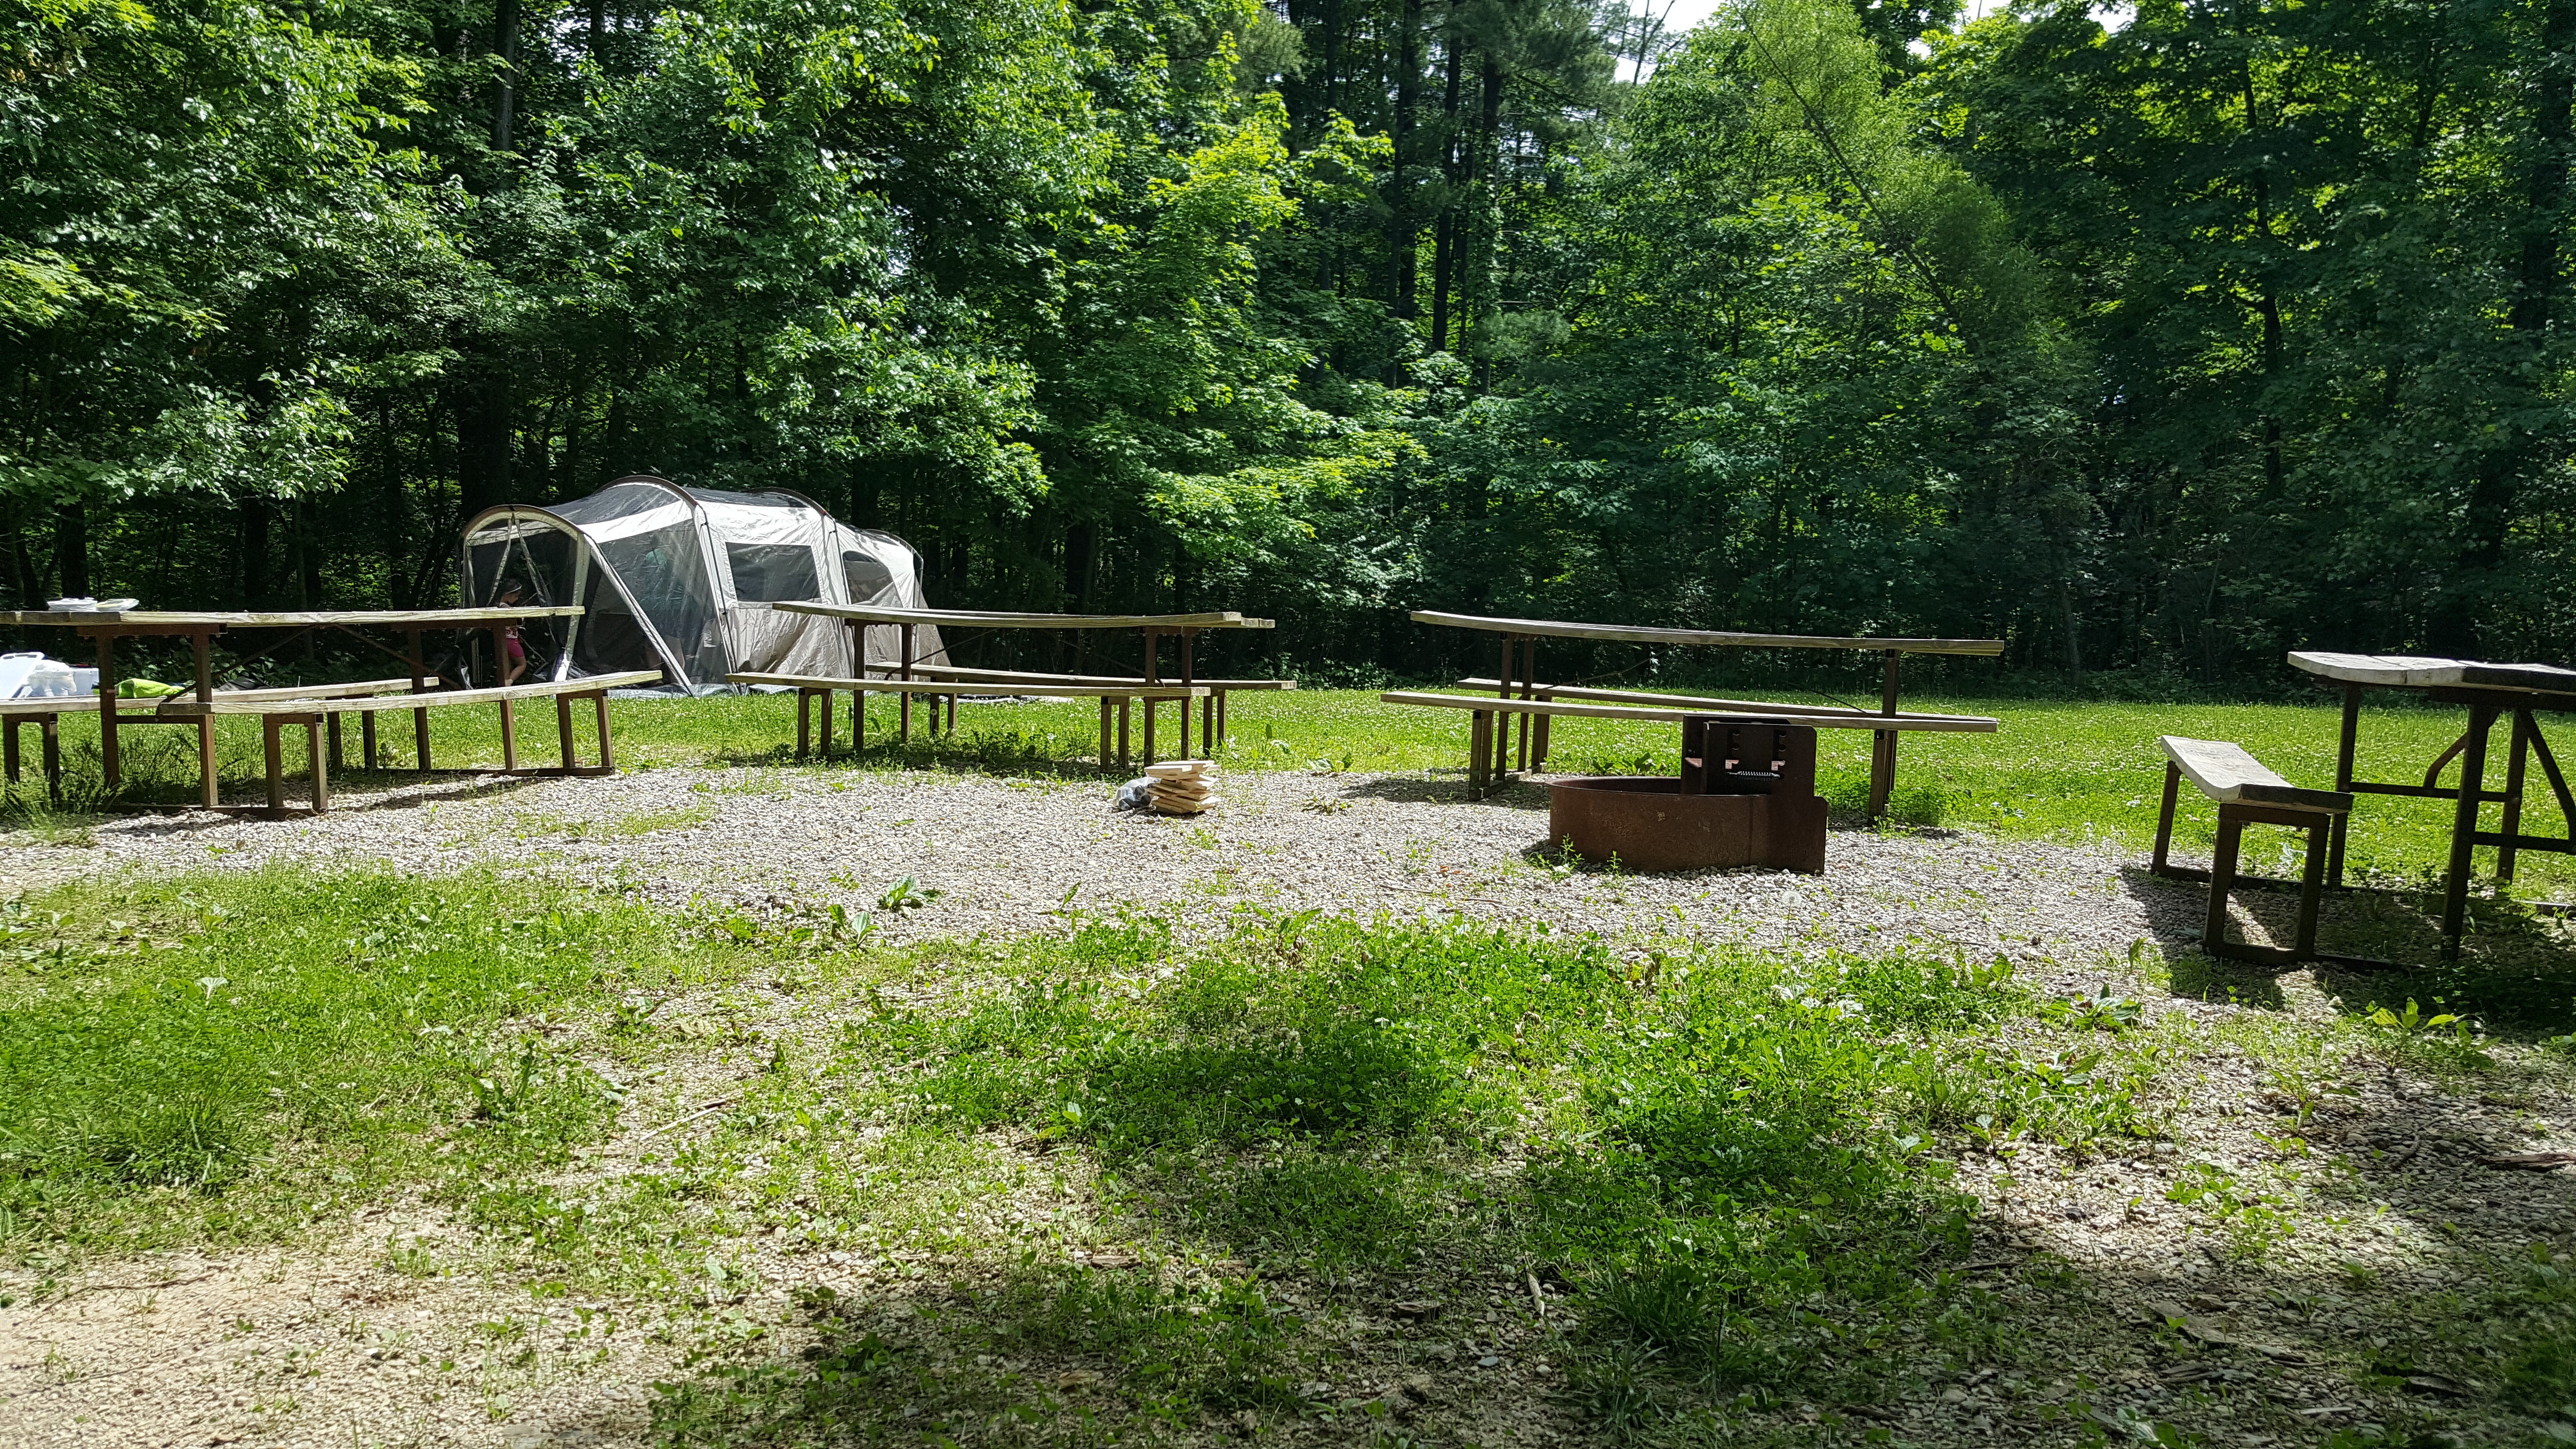 We especially liked the gravel around the picnic tables and fire area.